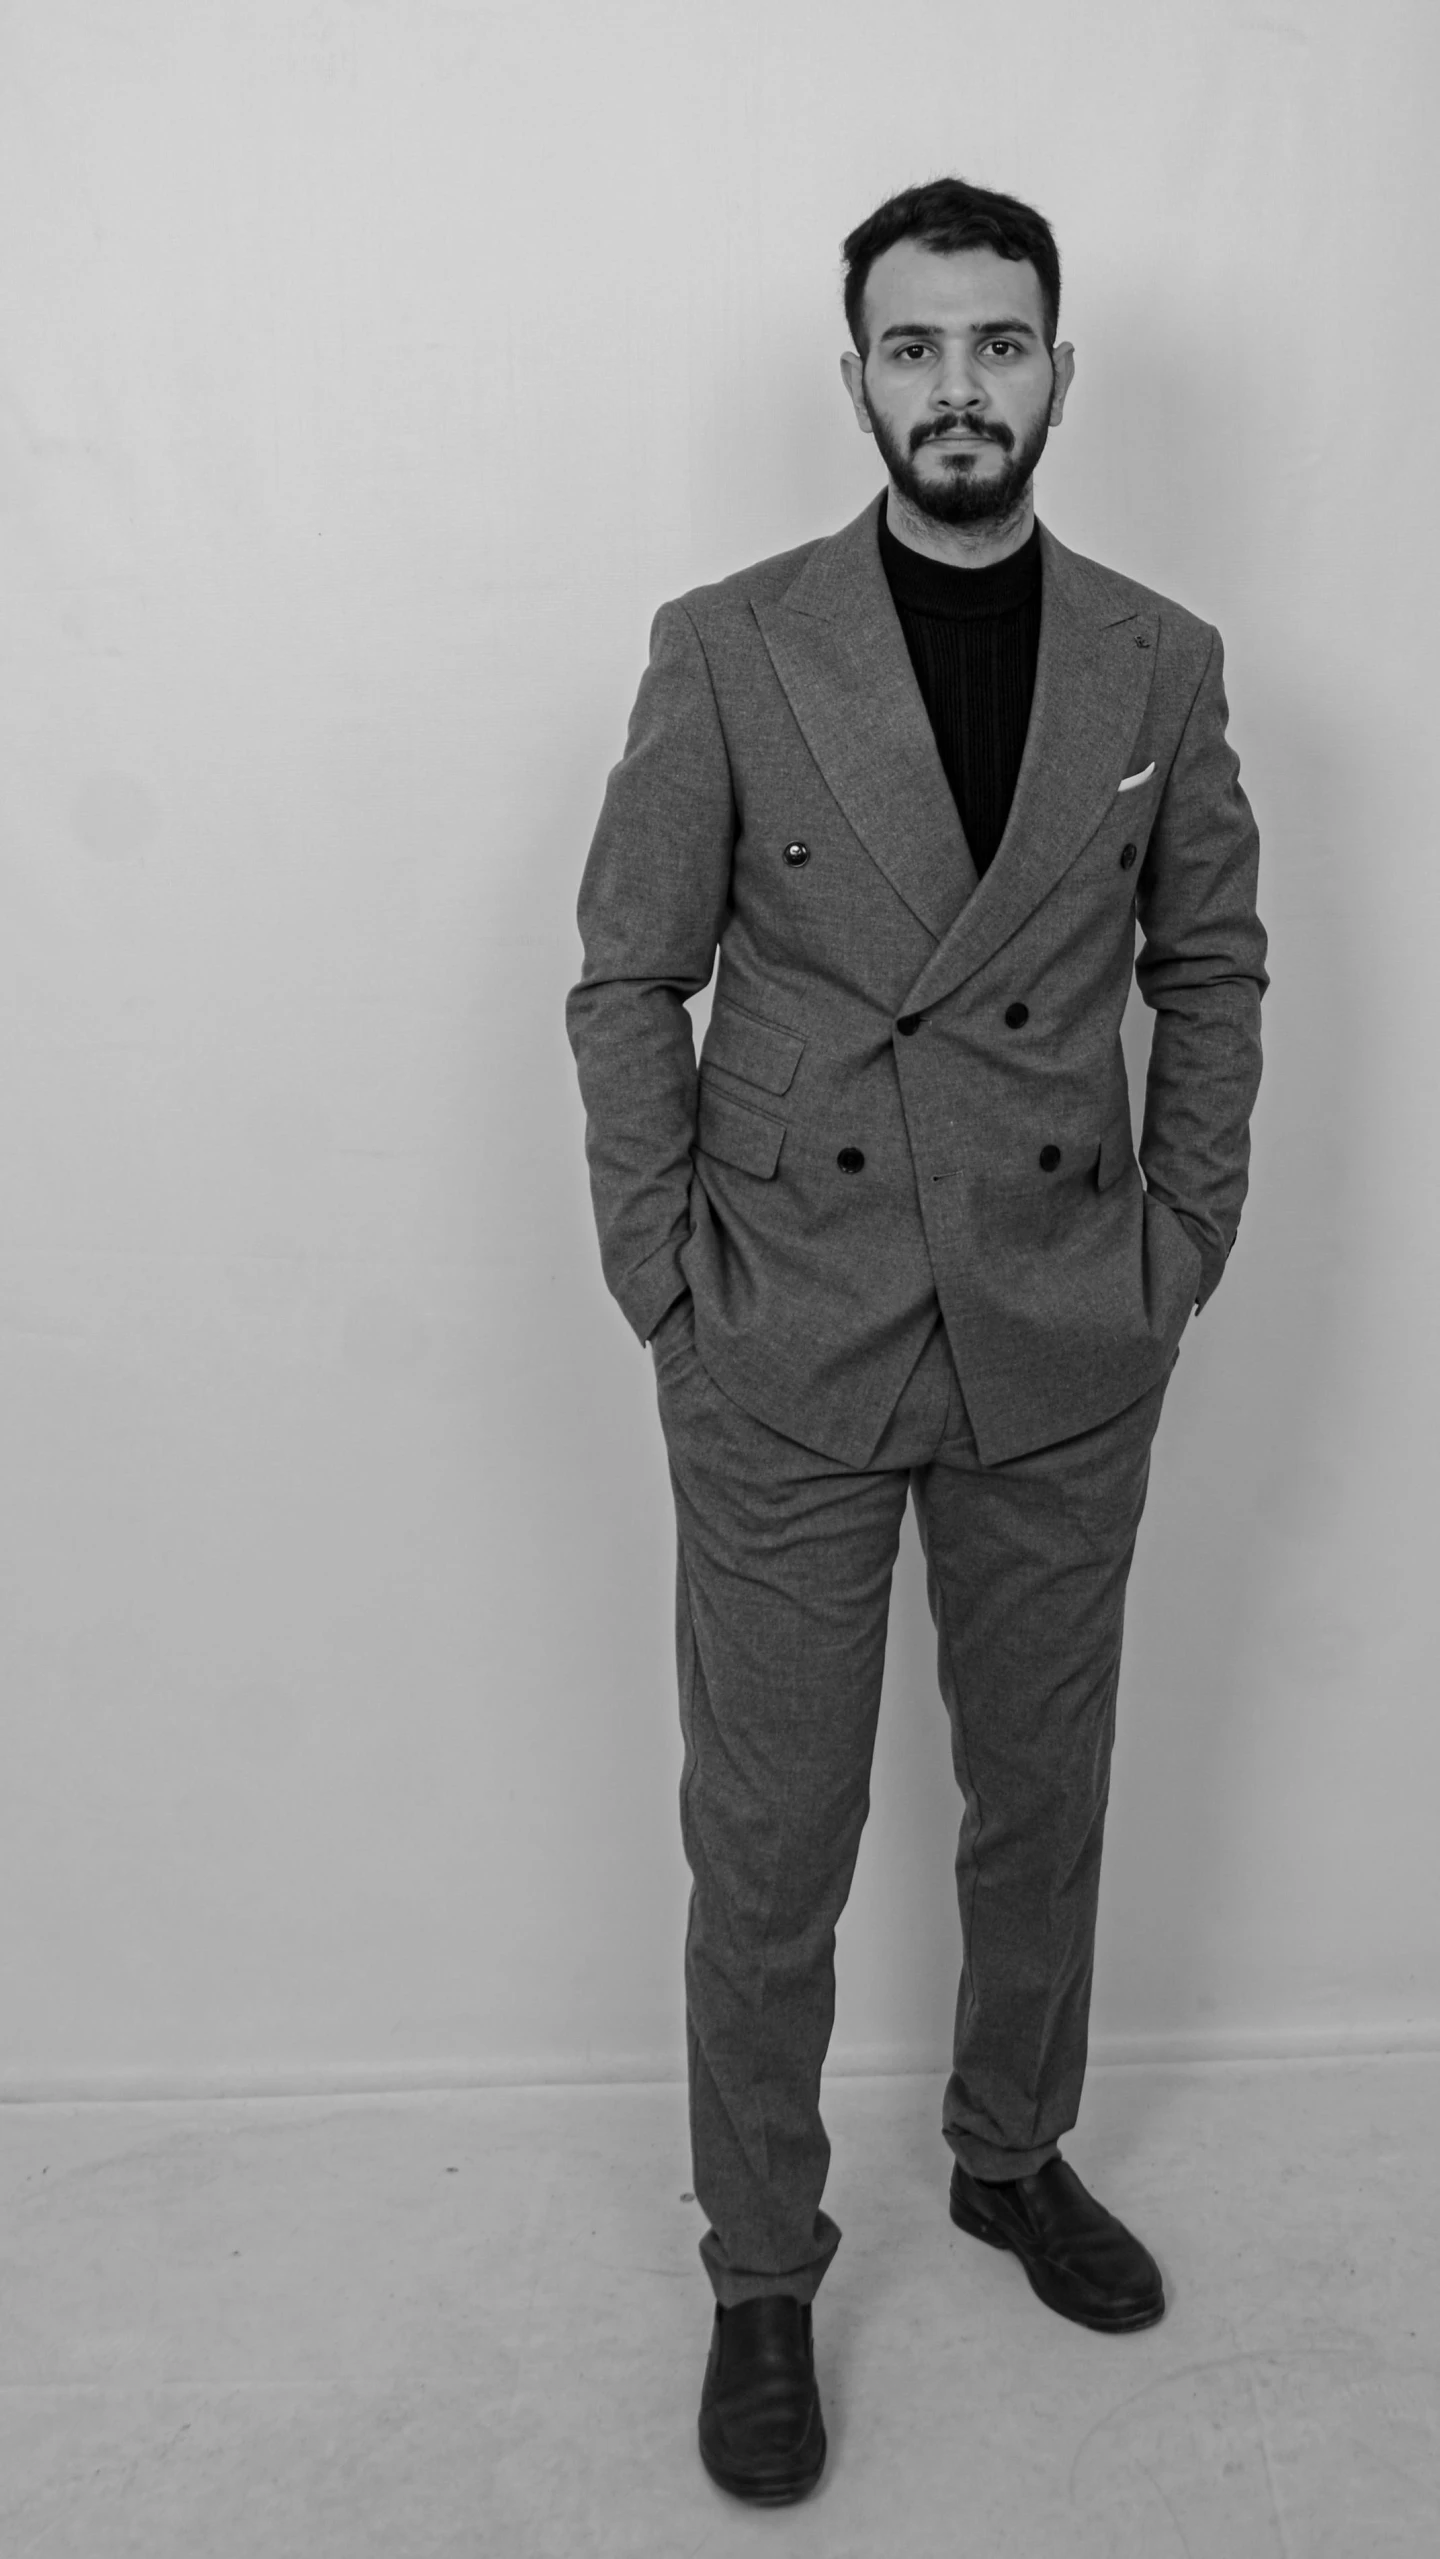 a man in a suit poses for a black and white po